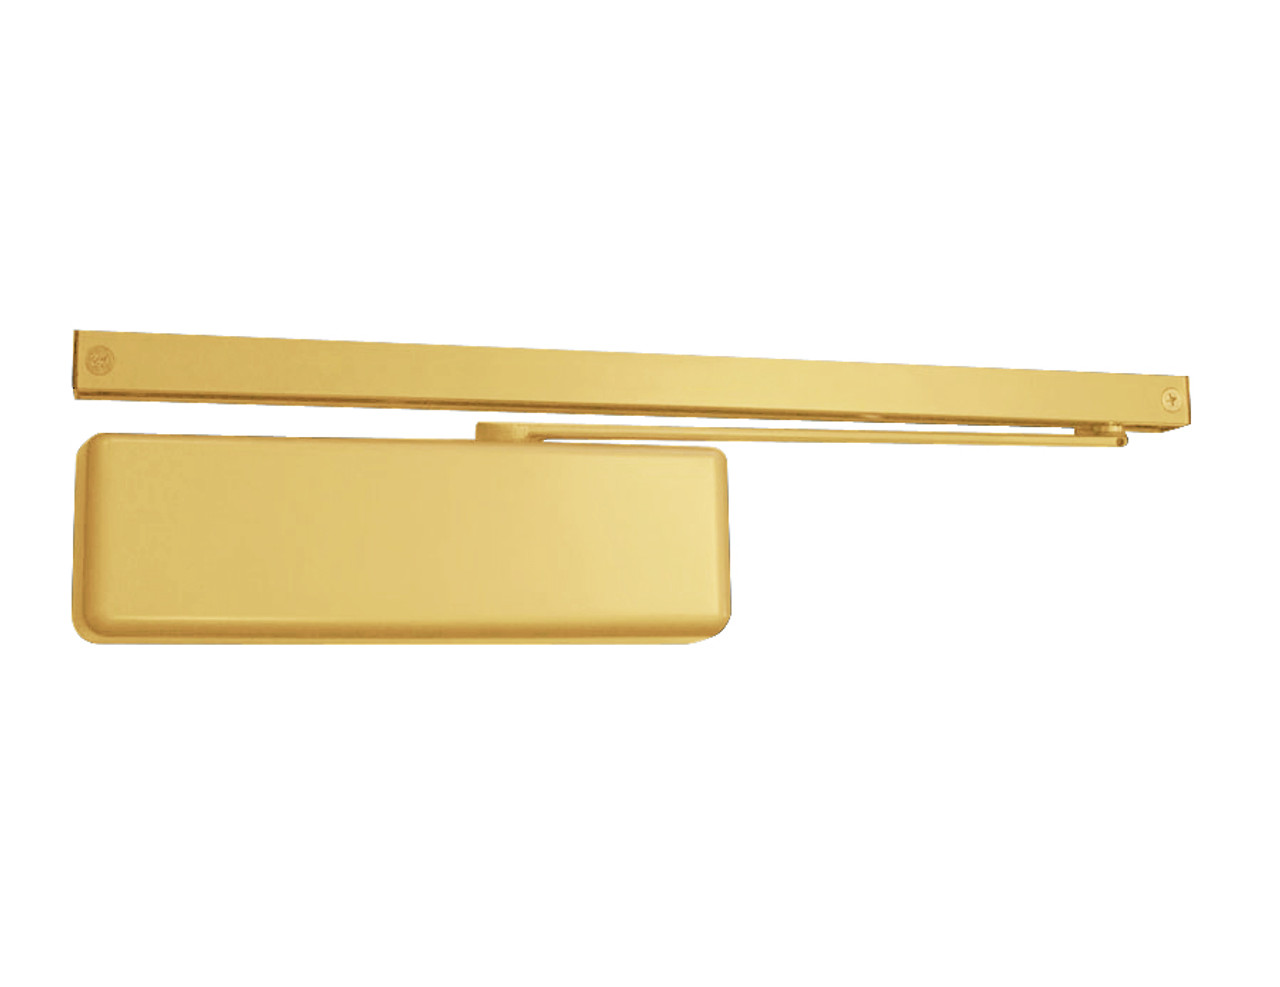 4014T-H-RH-US4 LCN Door Closer with Hold-Open Arm in Satin Brass Finish